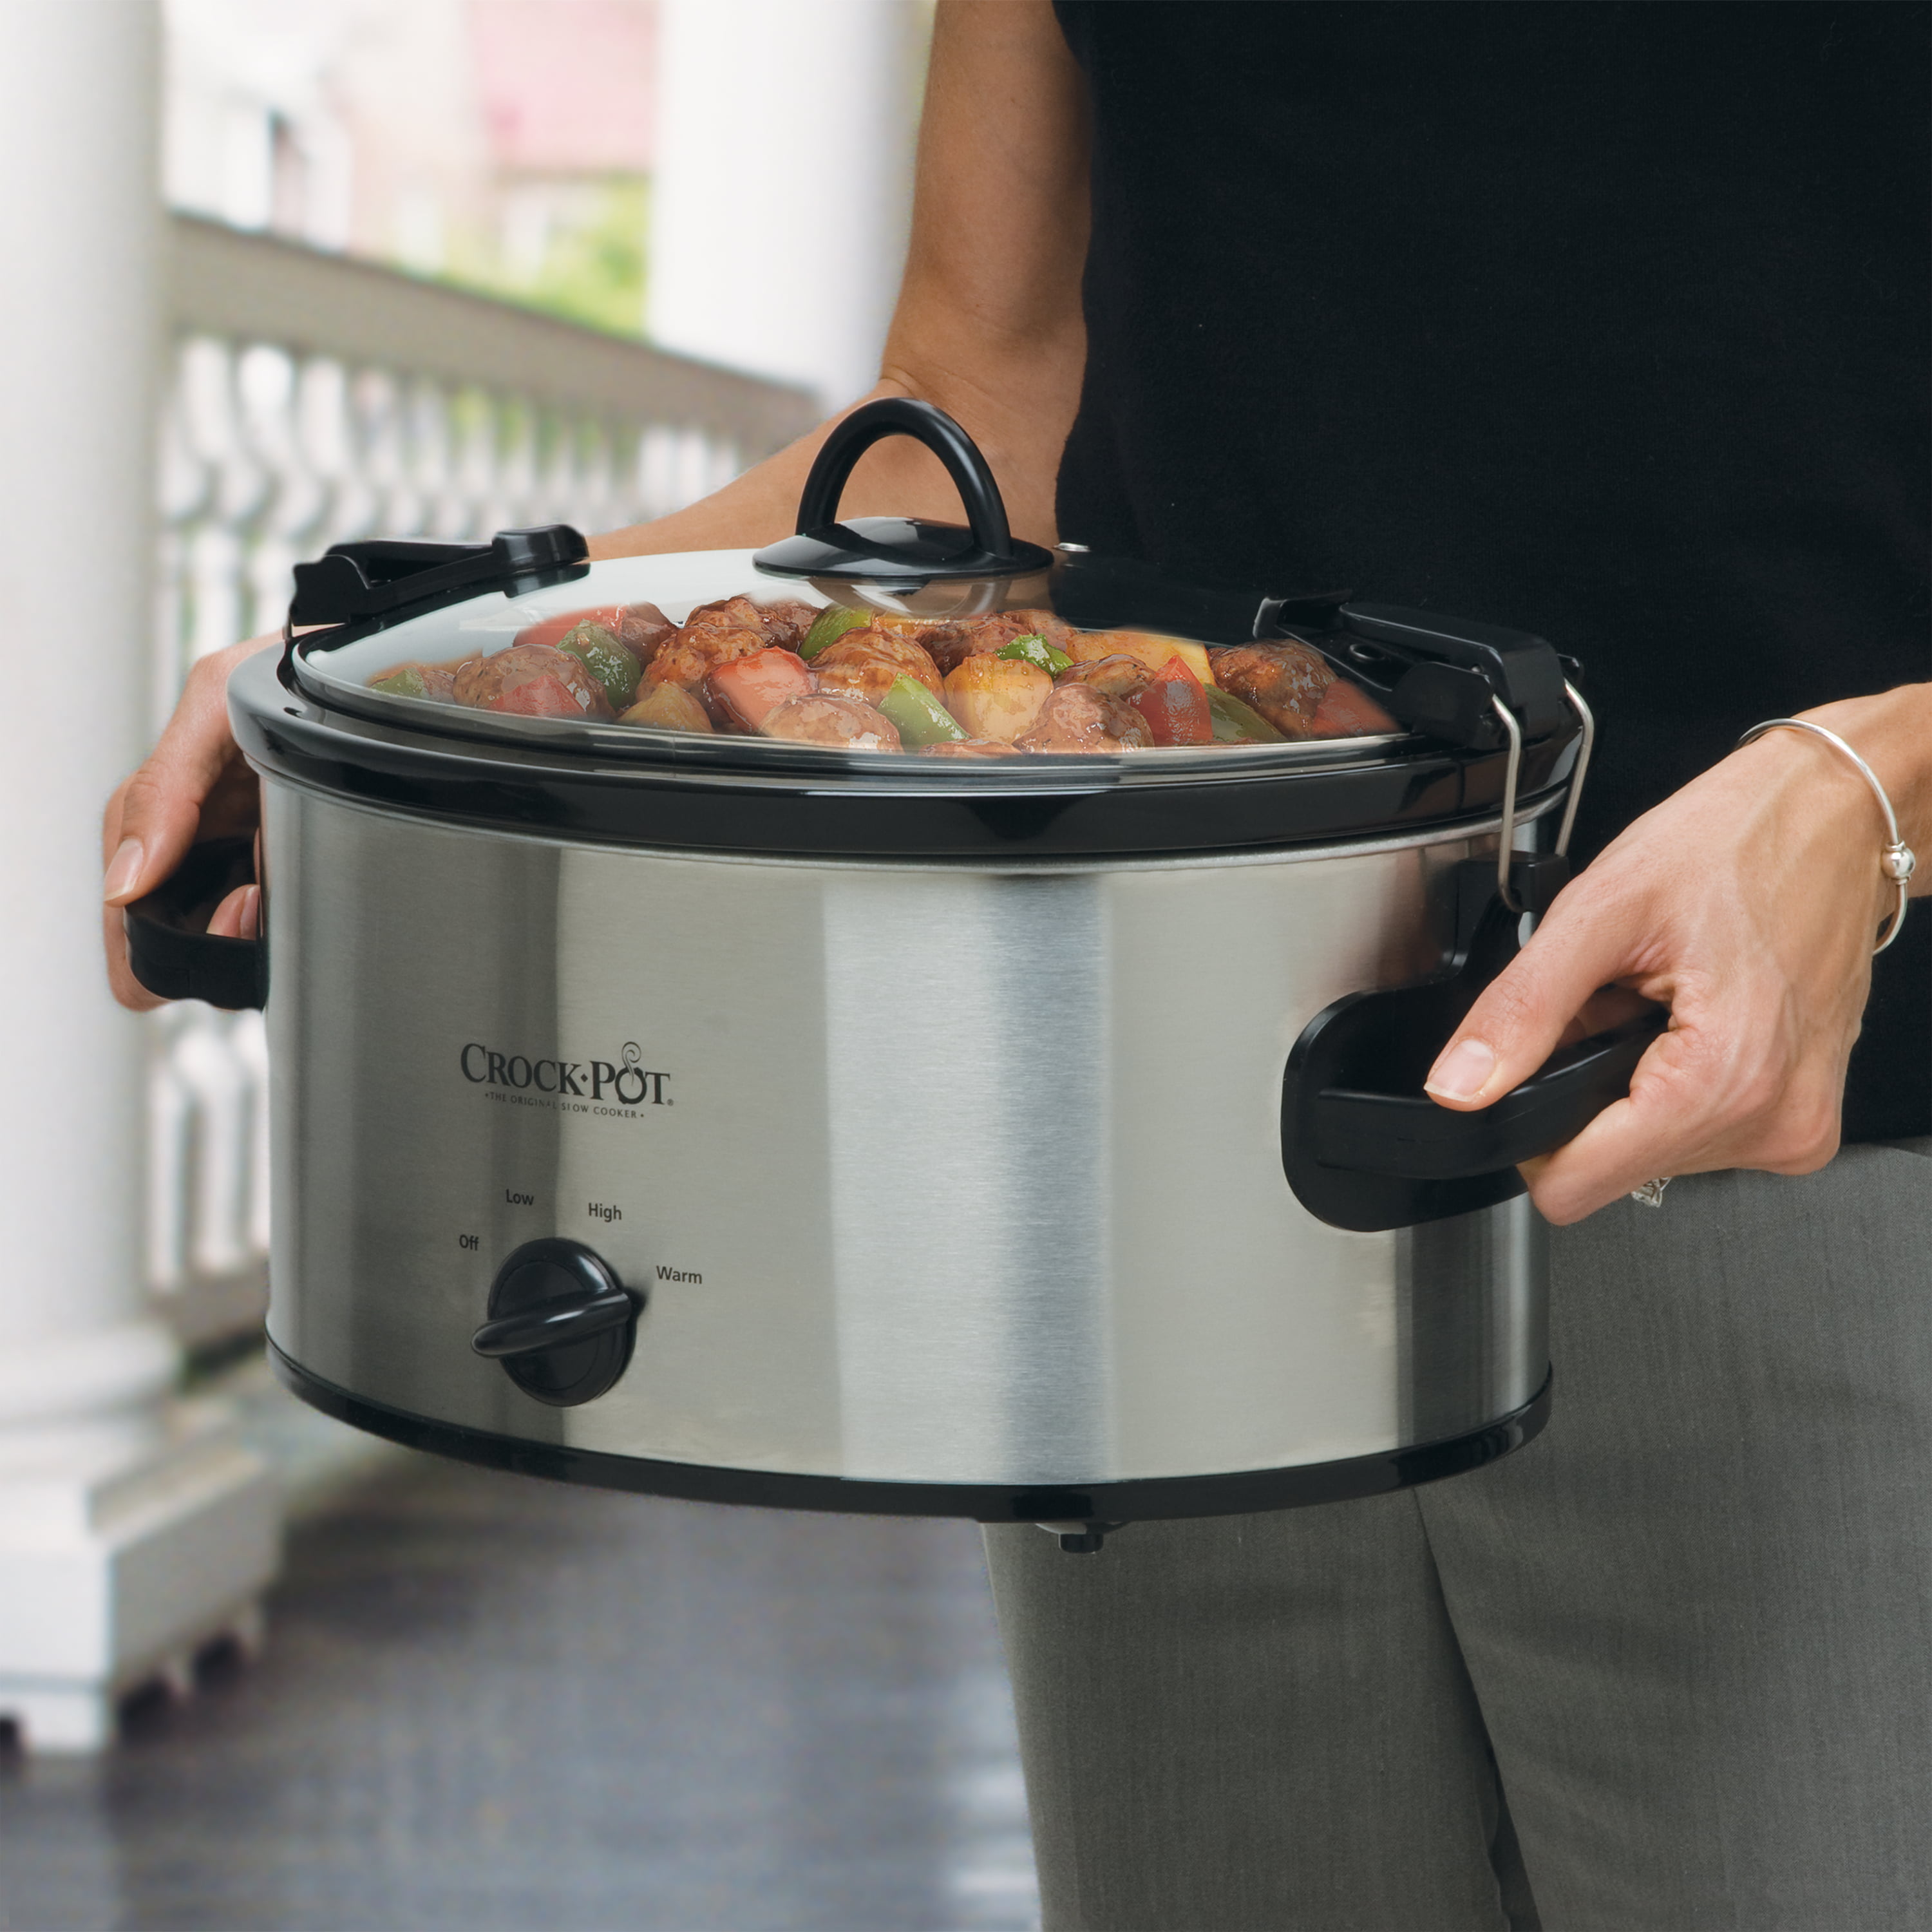 Crockpot Portable 6 Quart Slow Cooker with Locking Lid and Digital